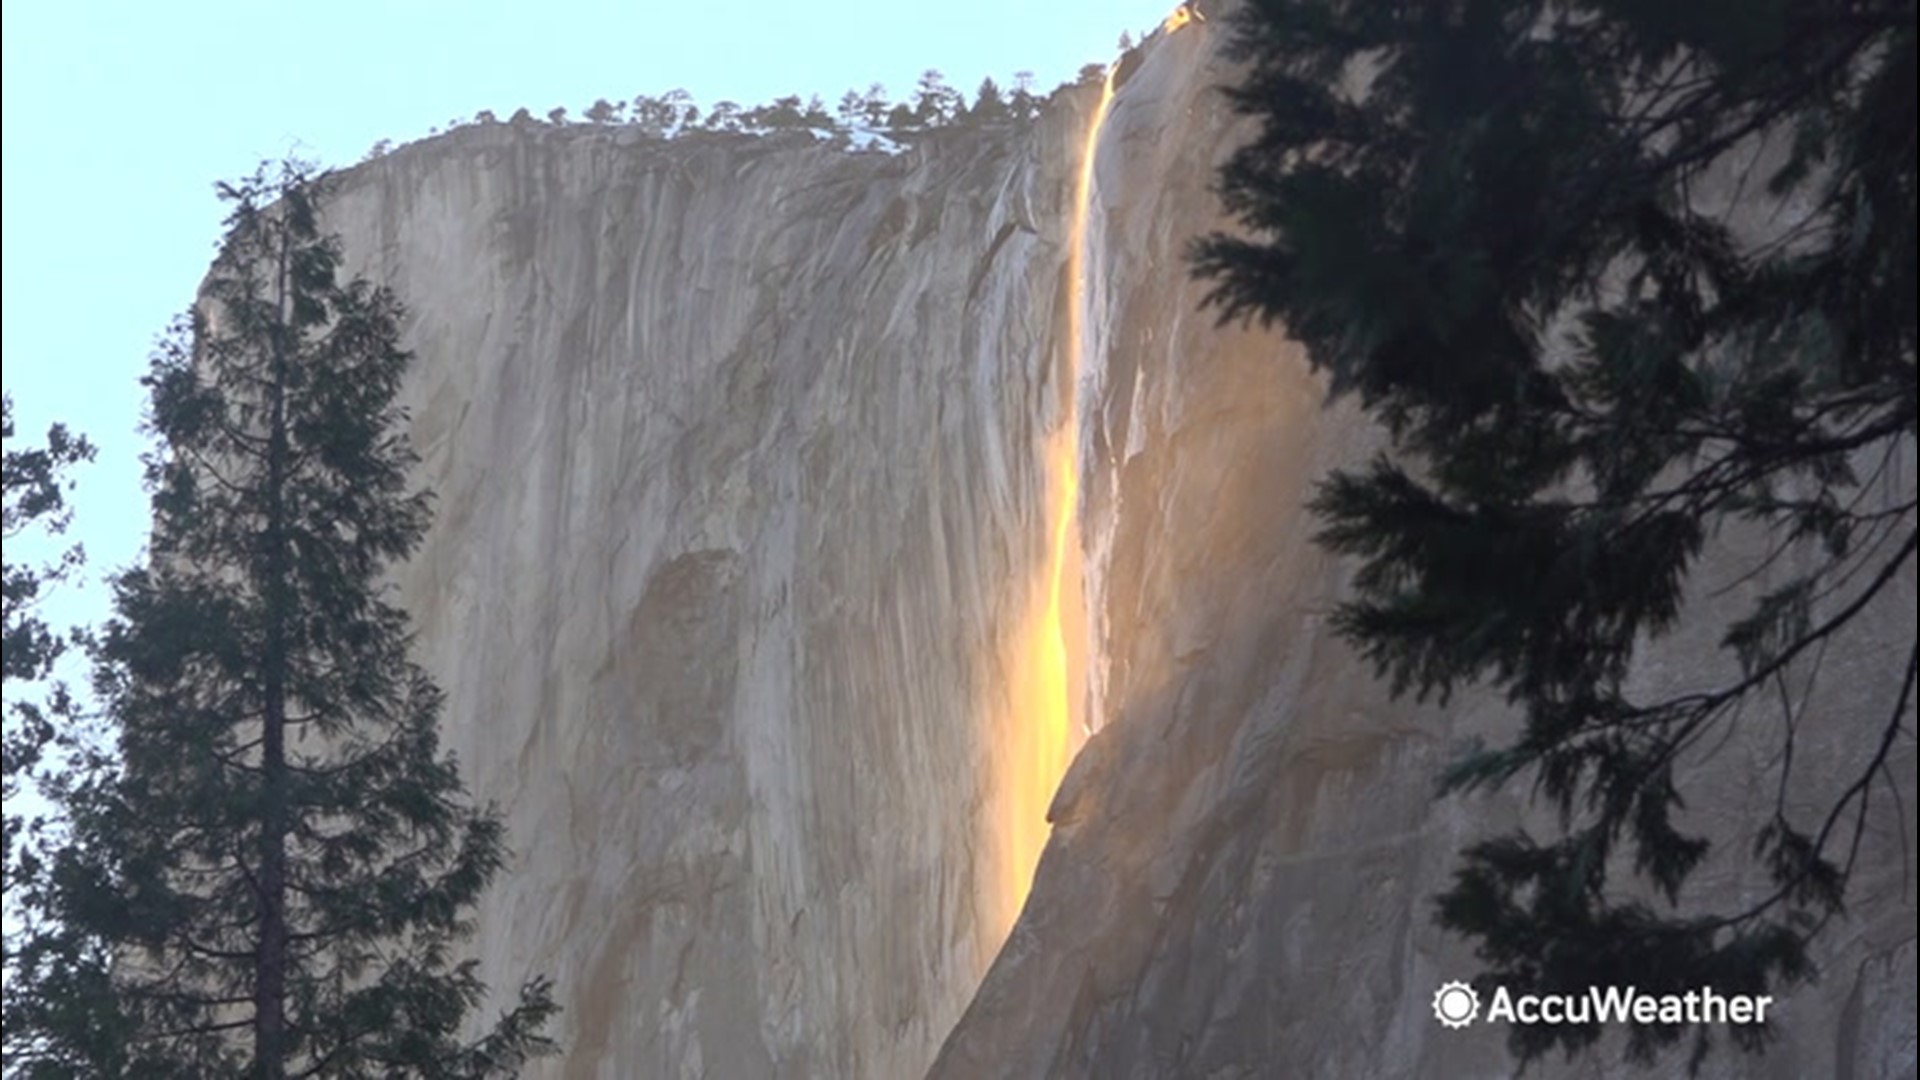 The 'firefall' is a phenomenon that occurs when the sun lights up Horsetail Fall during sunset, in California's Yosemite National Park. This footage was shot on Feb. 24.